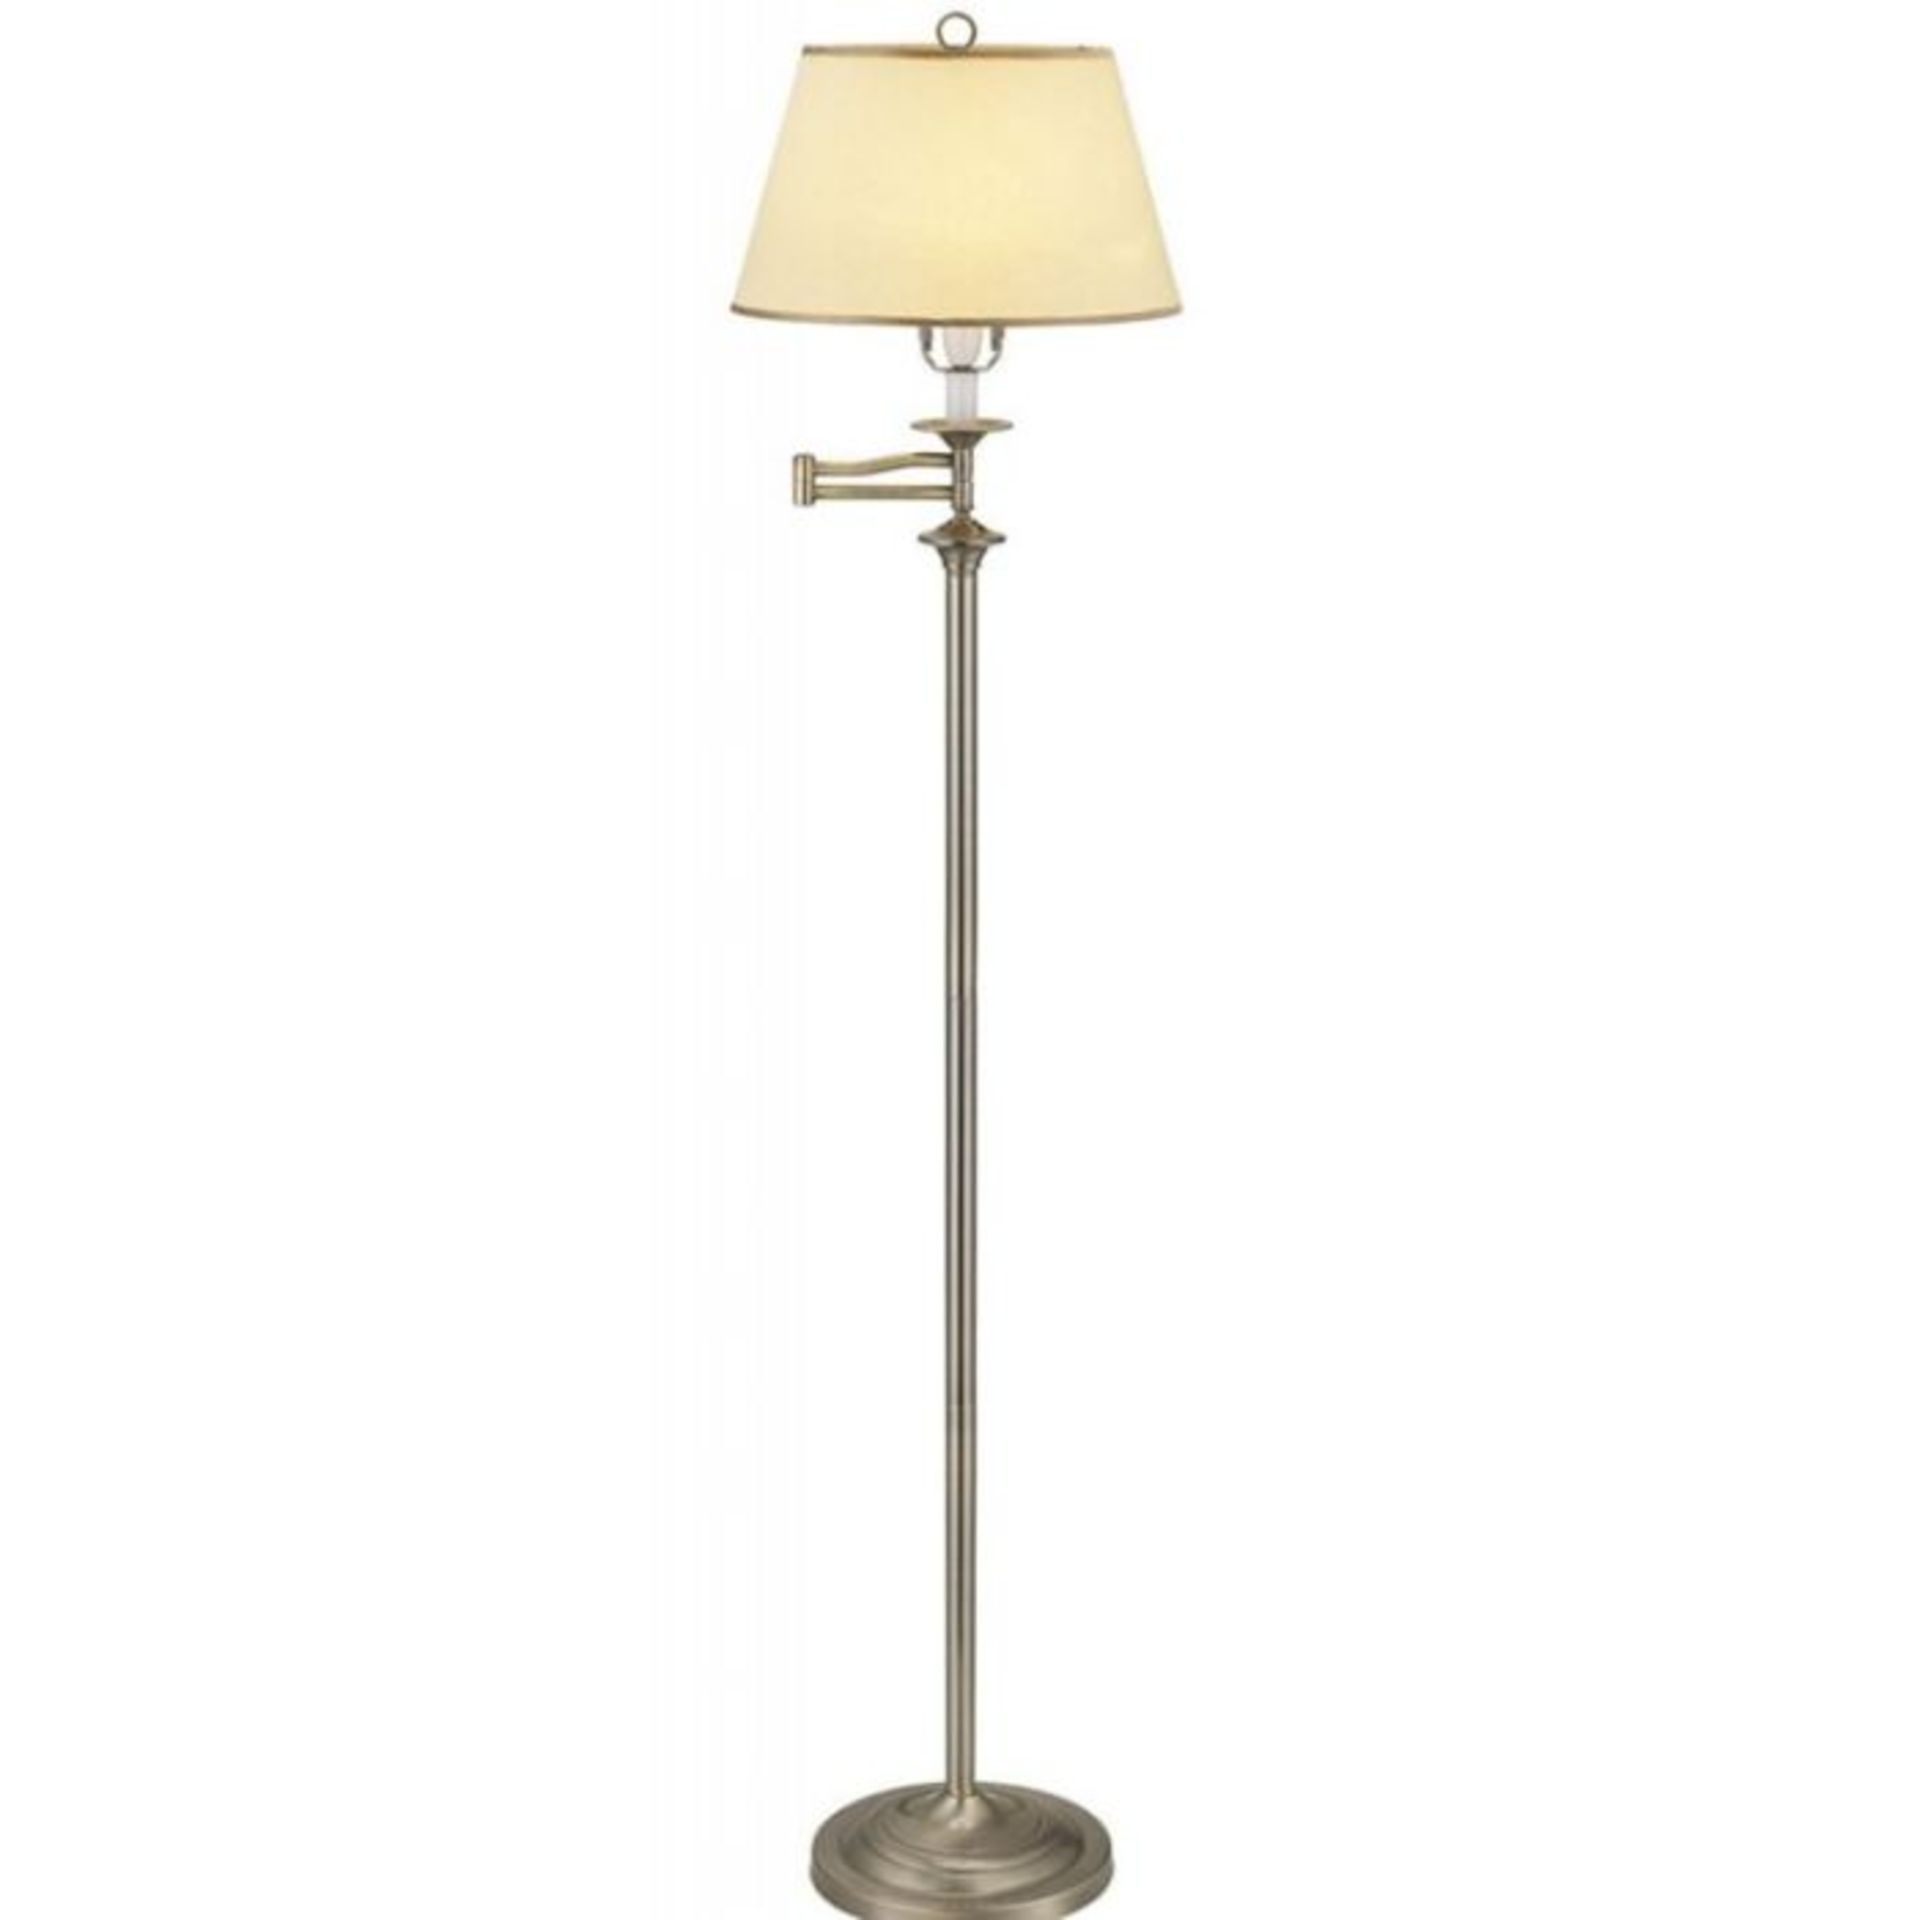 Marlow Home Co., Candlewood 155cm Floor Lamp (ANTIQUE BRASS BASE & CREAM SHADE) - RRP £77.99 (